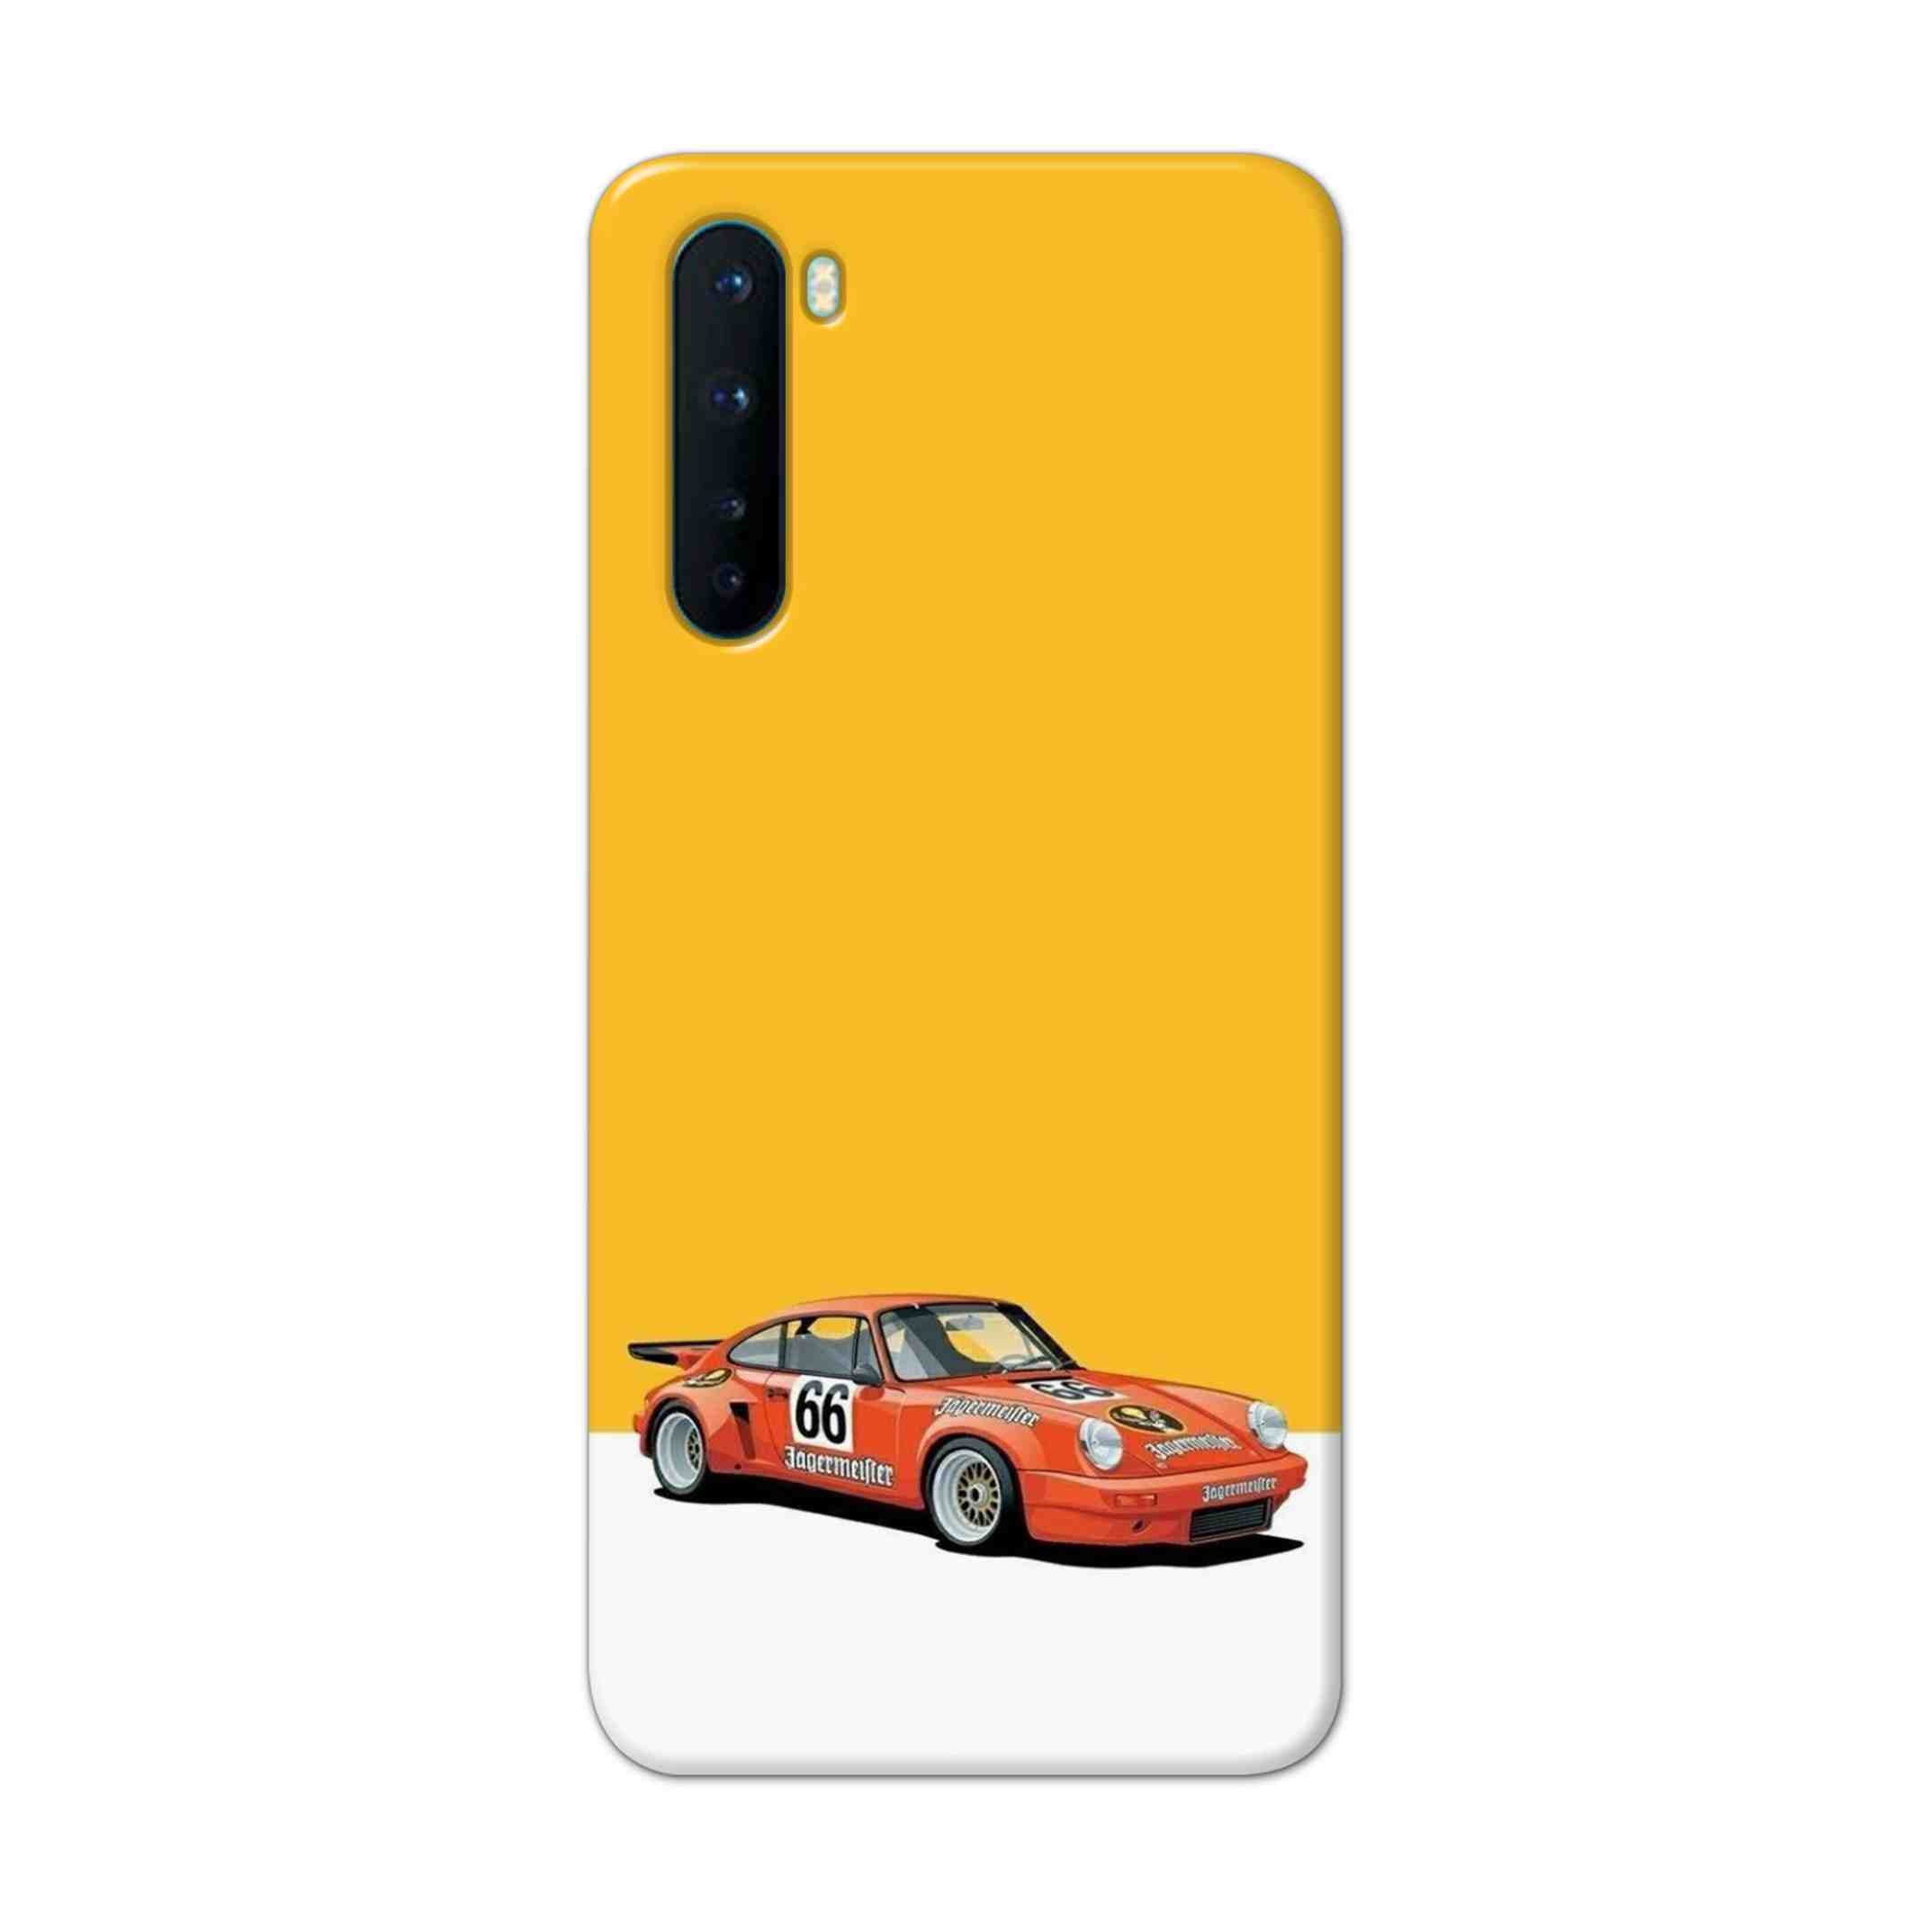 Buy Porche Hard Back Mobile Phone Case Cover For OnePlus Nord Online